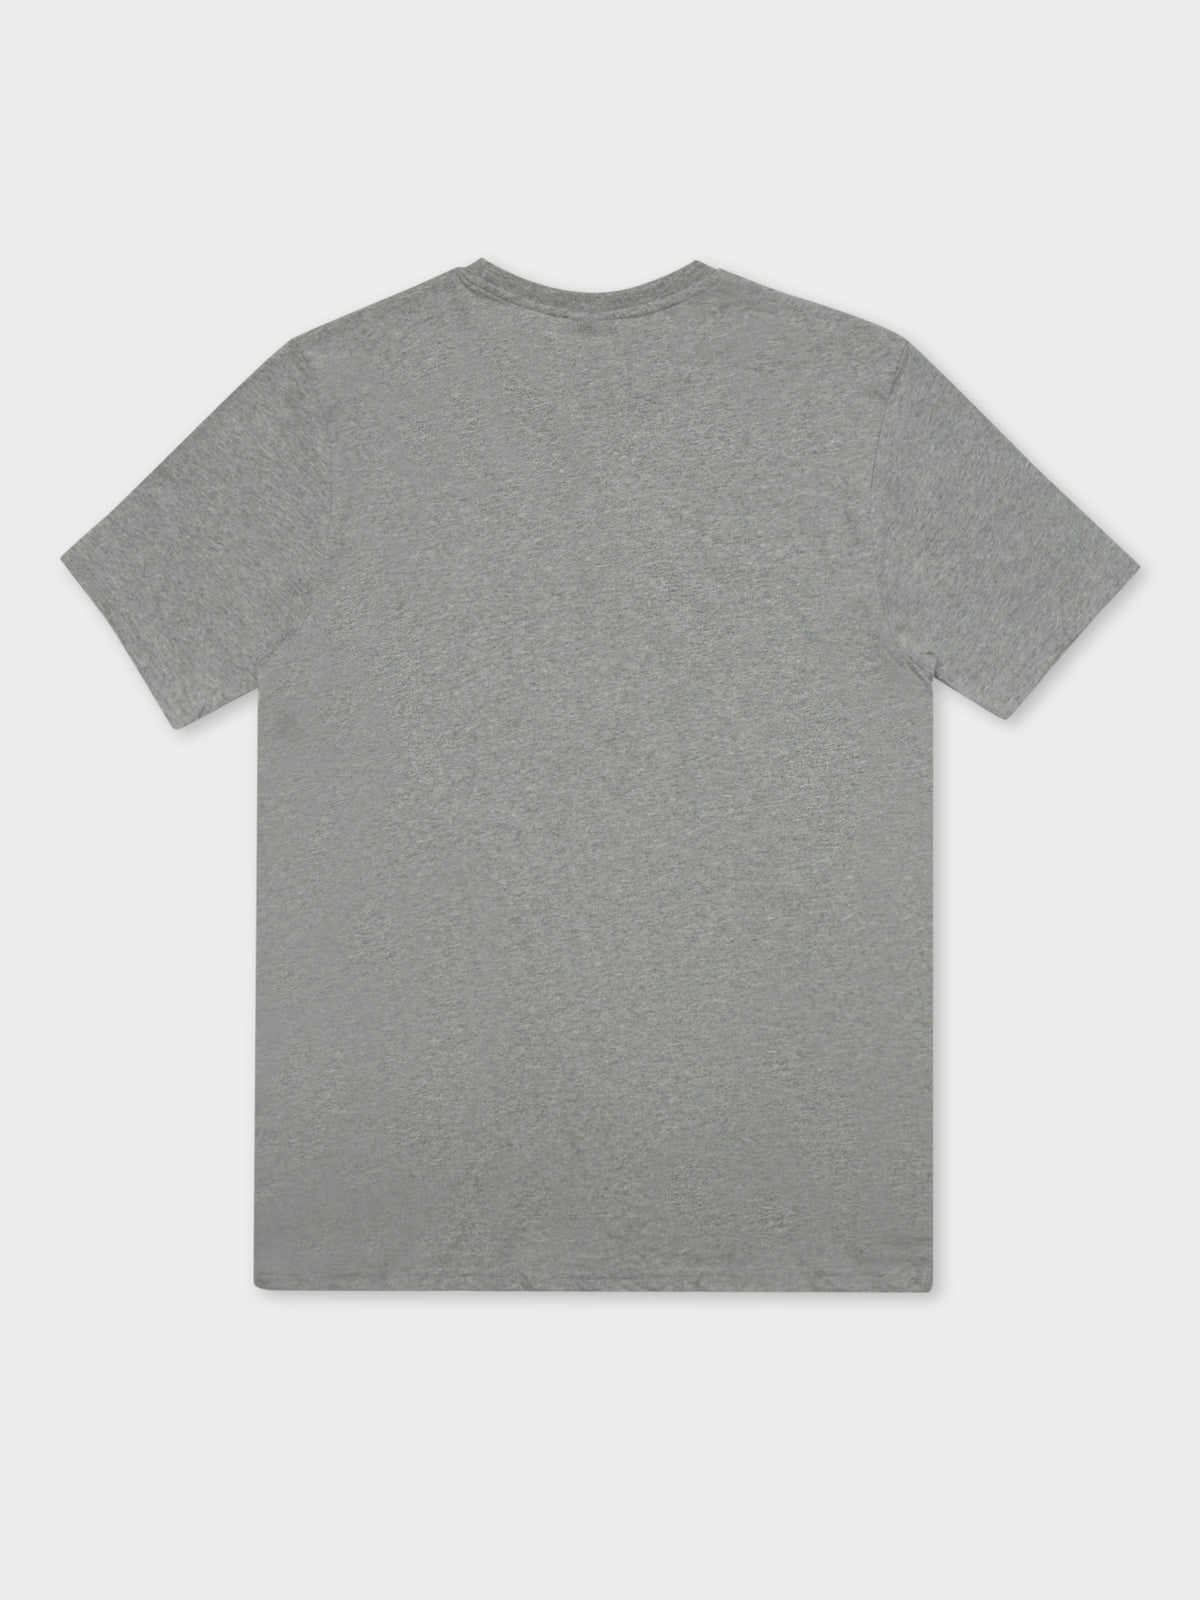 Canaletto T-Shirt in Grey Marl